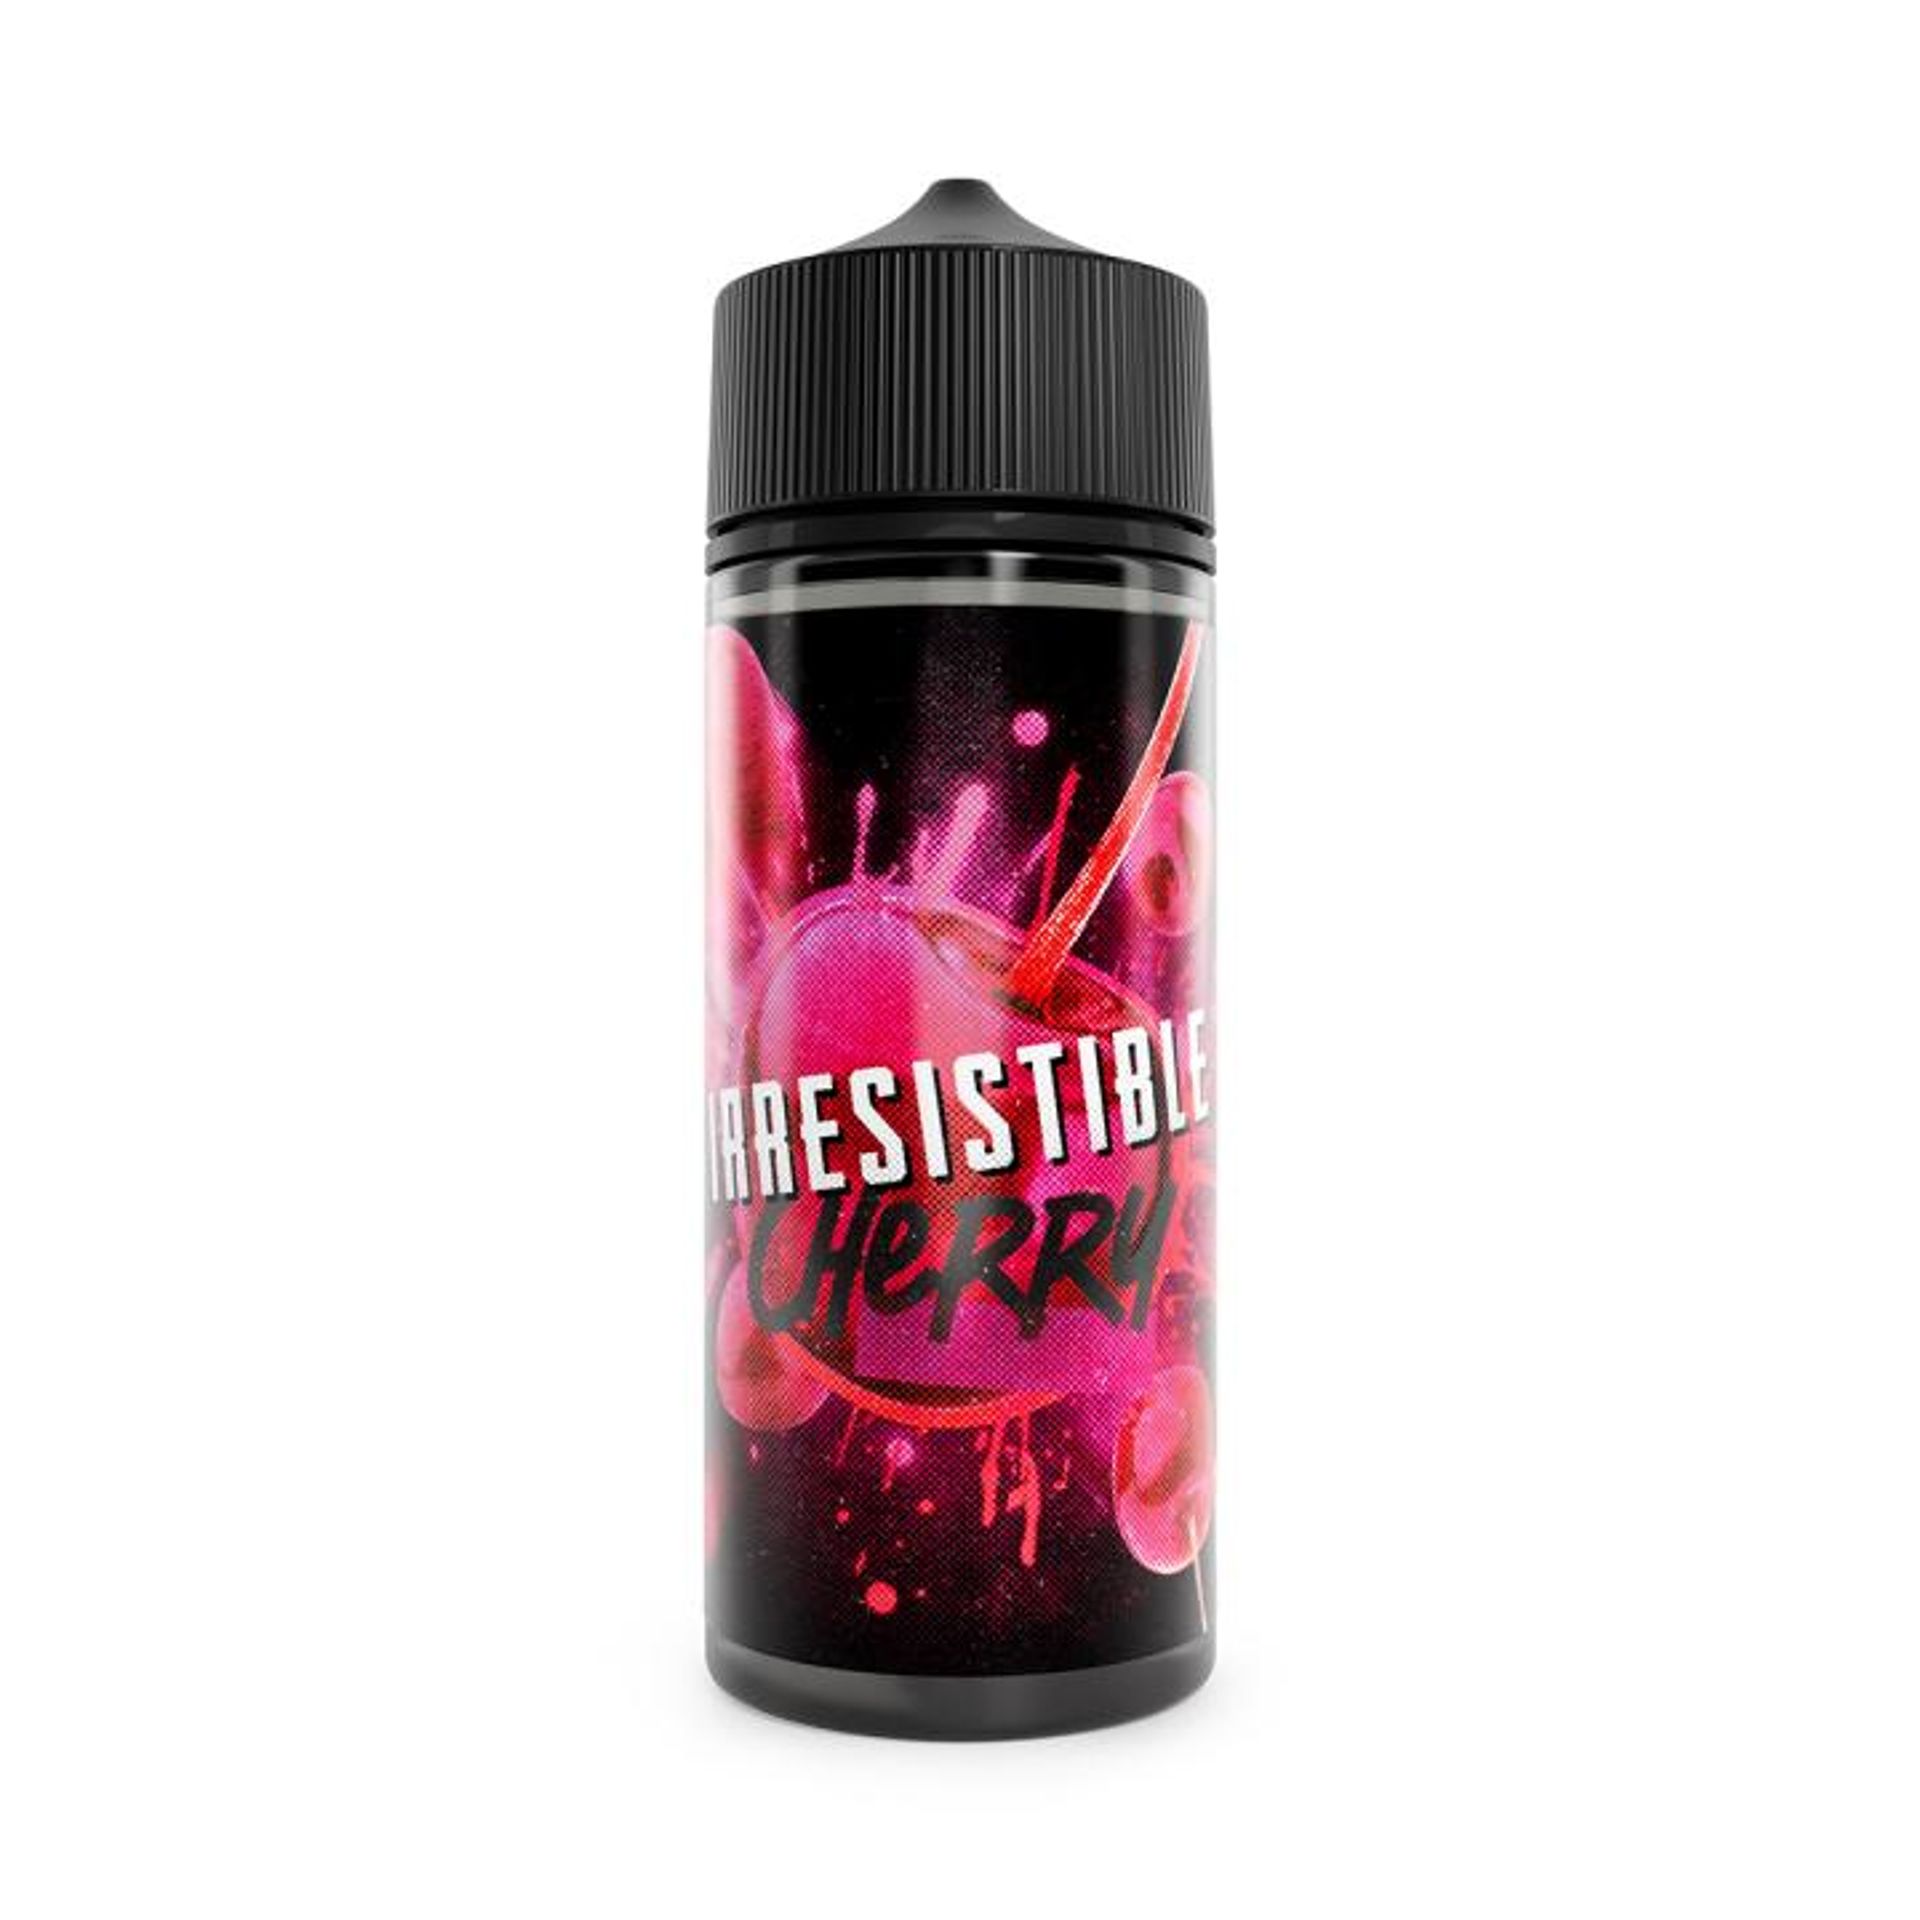 Image of Cherry by Irresistible E-liquids